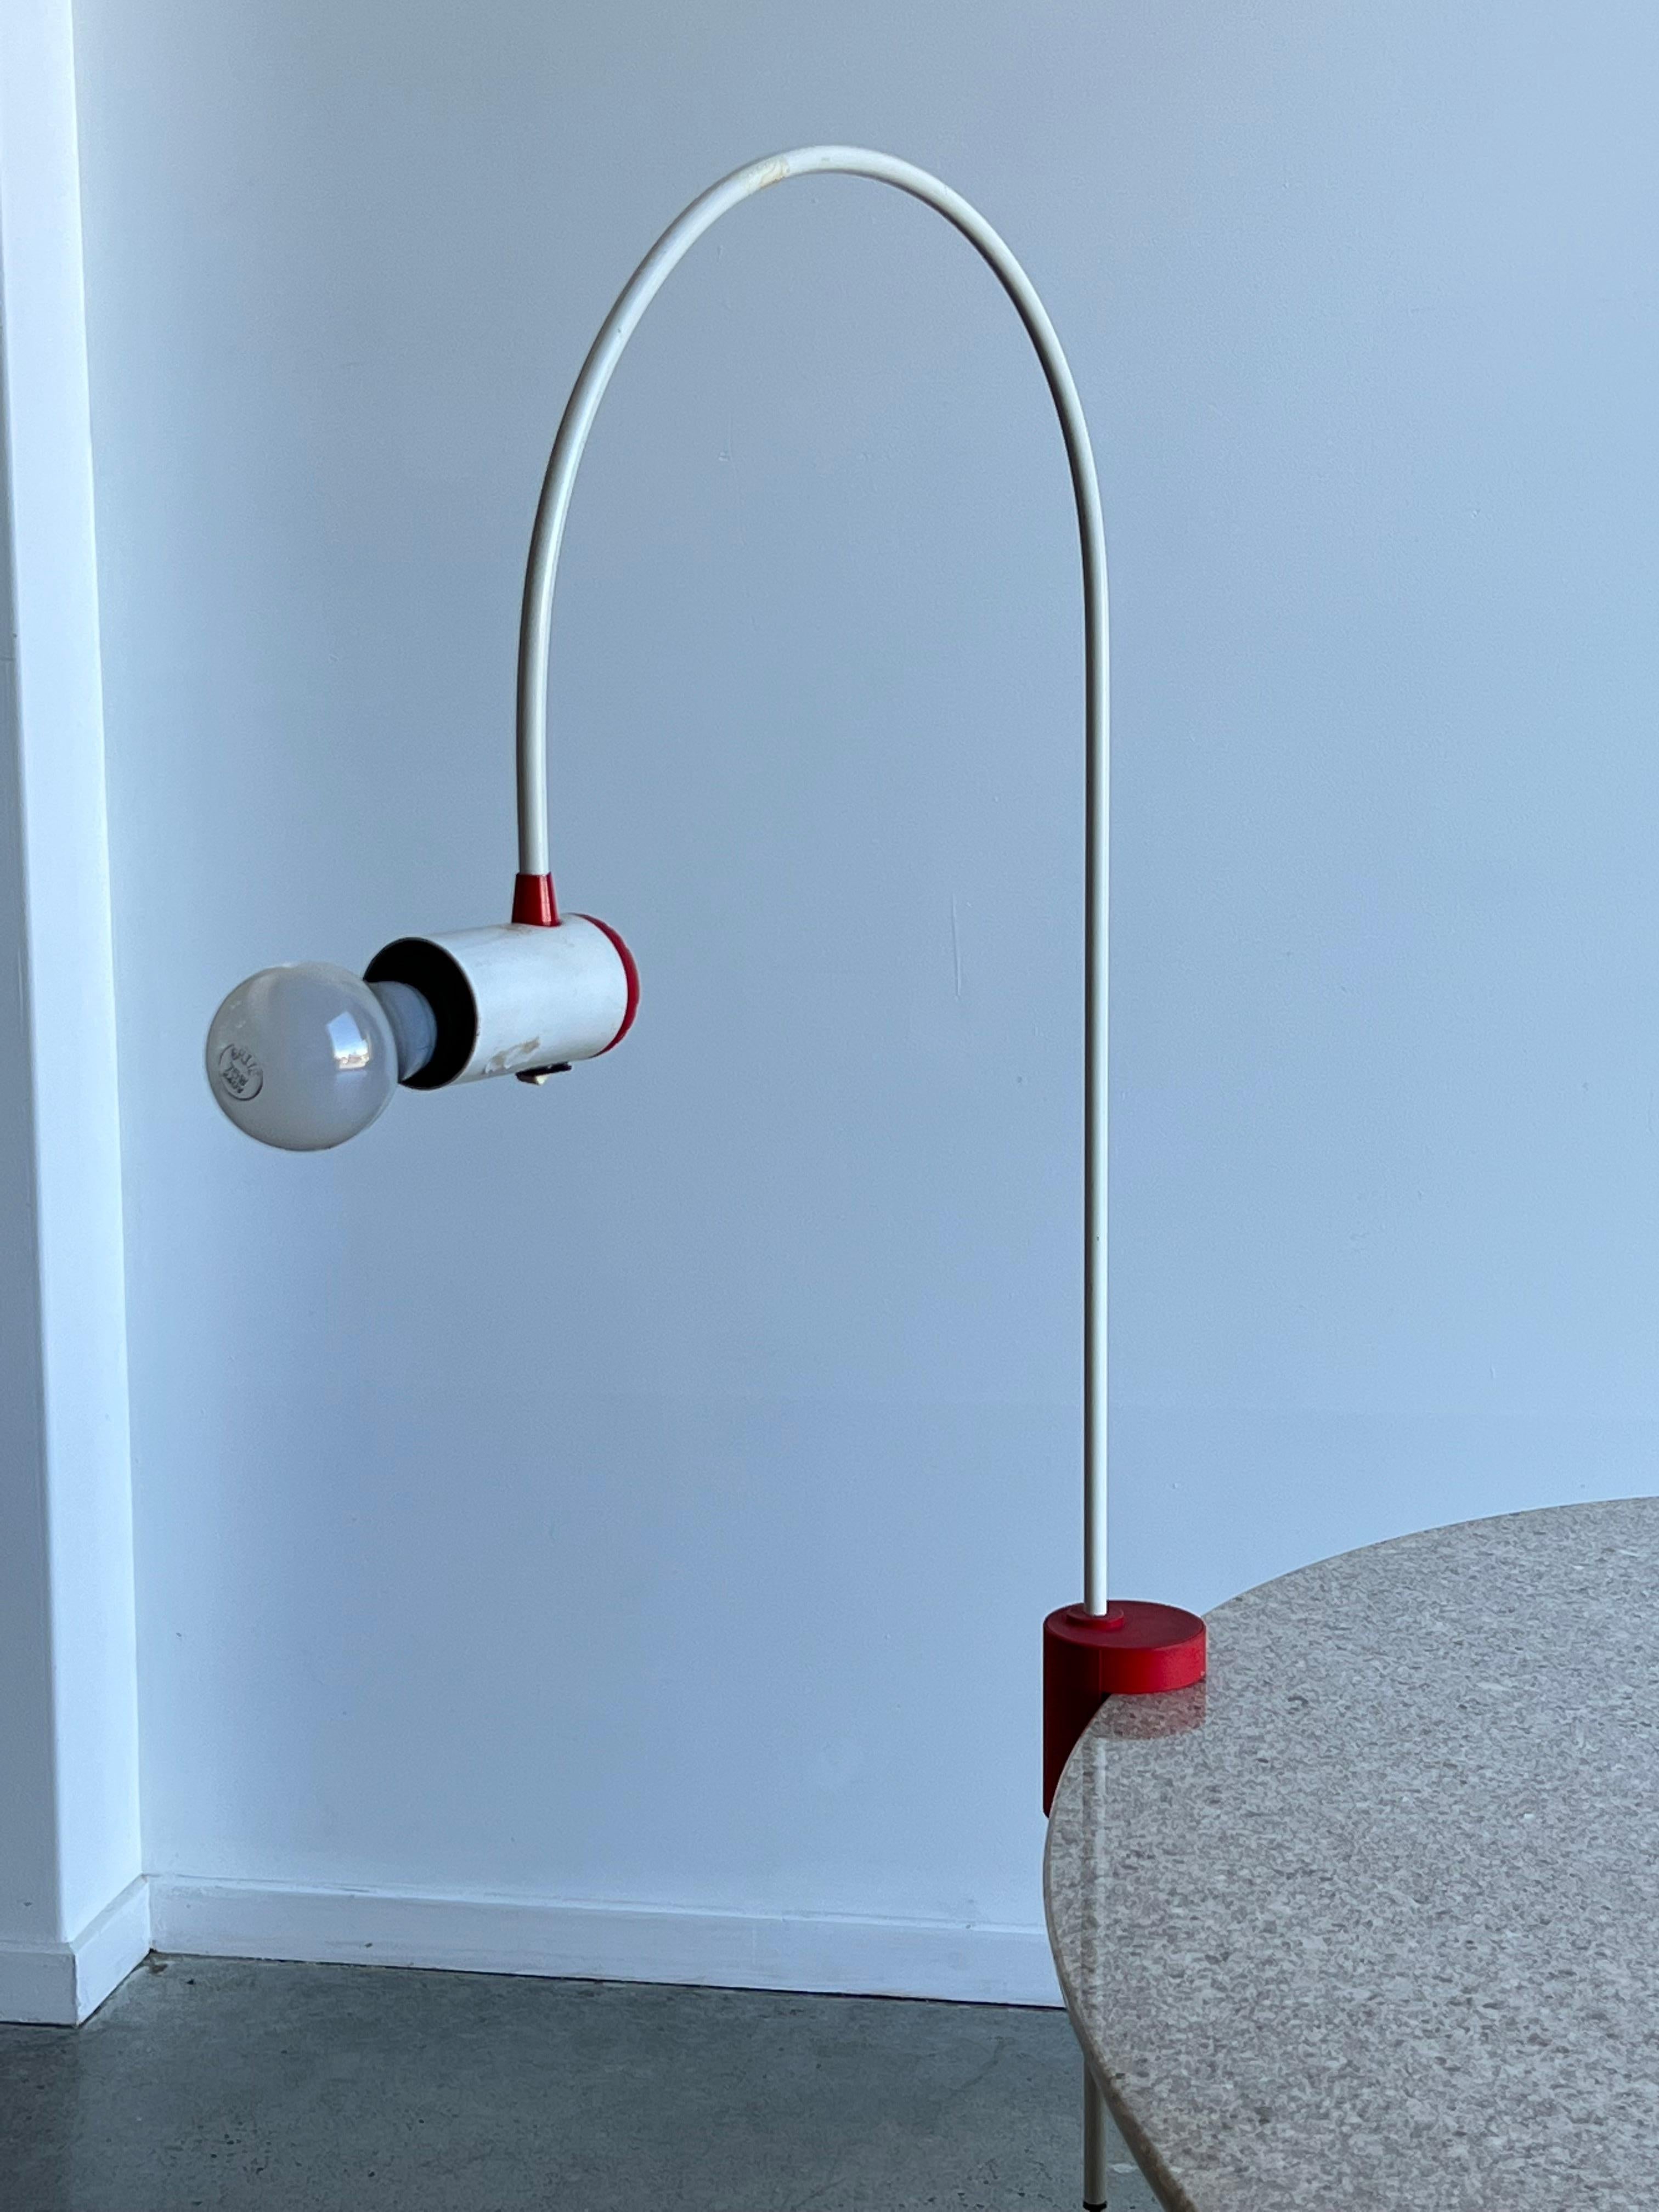 Targetti arc shaped large elegant and minimalistic desk lamp with clamp, adjustable head height. Italy, 1970s.